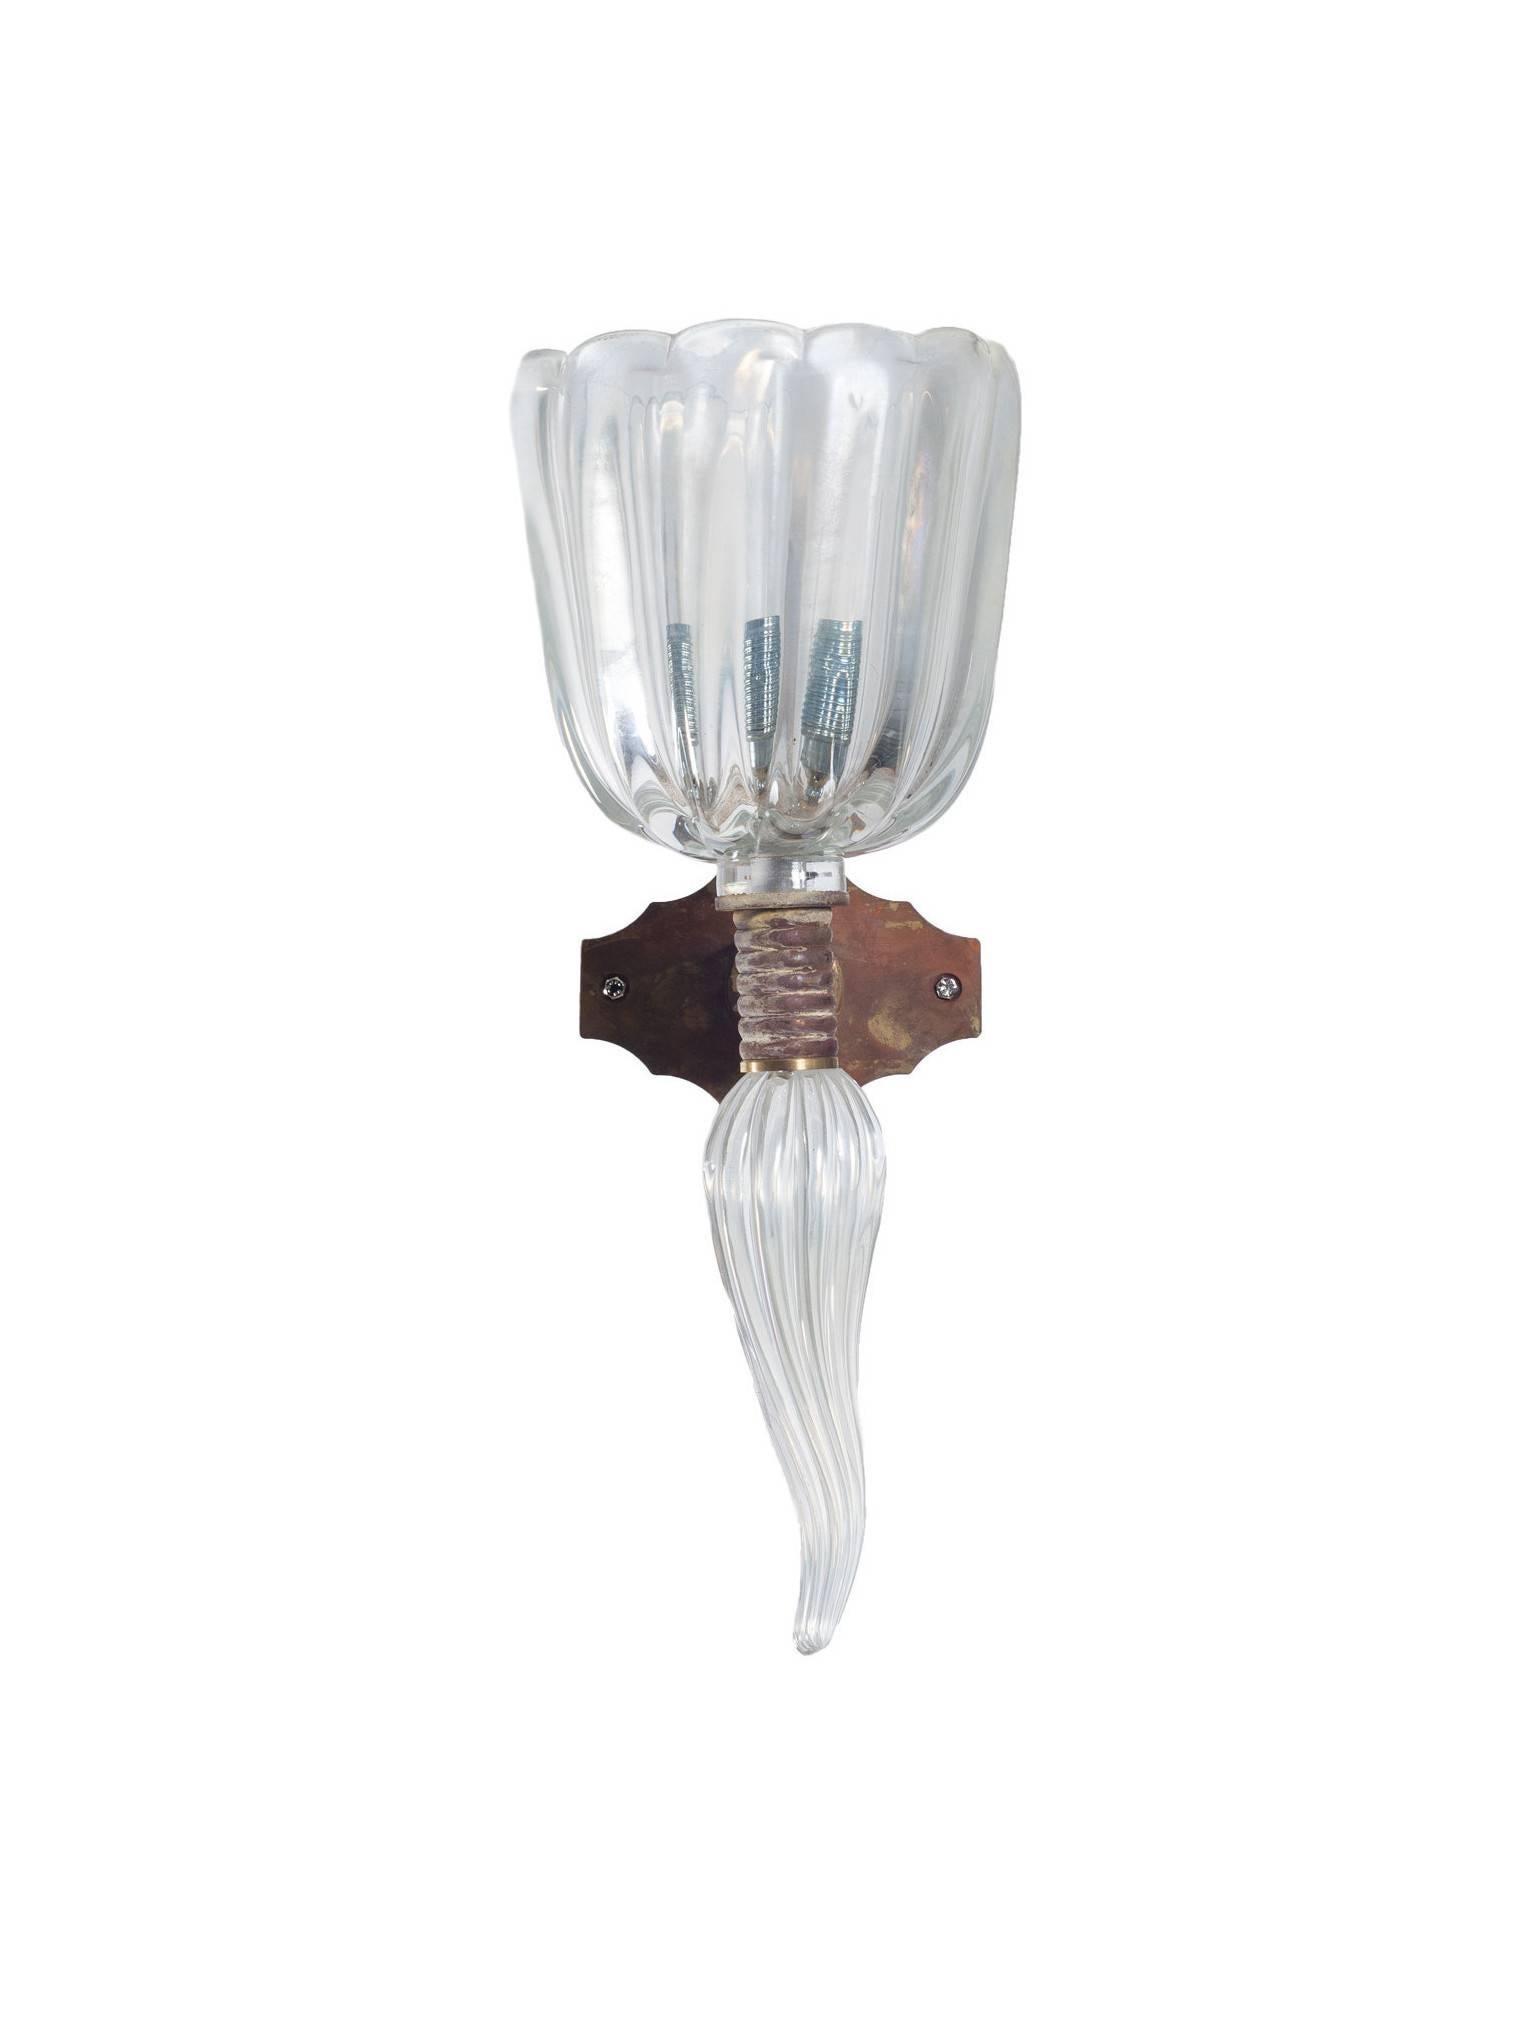 Italian Venetian sconces, blown Murano glass, iridescent and transparent, Seguso, 1960s.
This is a set of six amazing Italian sconces, attributed to Seguso and dated 1960s, composed by an elegant glass cup, decorated at the bottom by a glass flame,